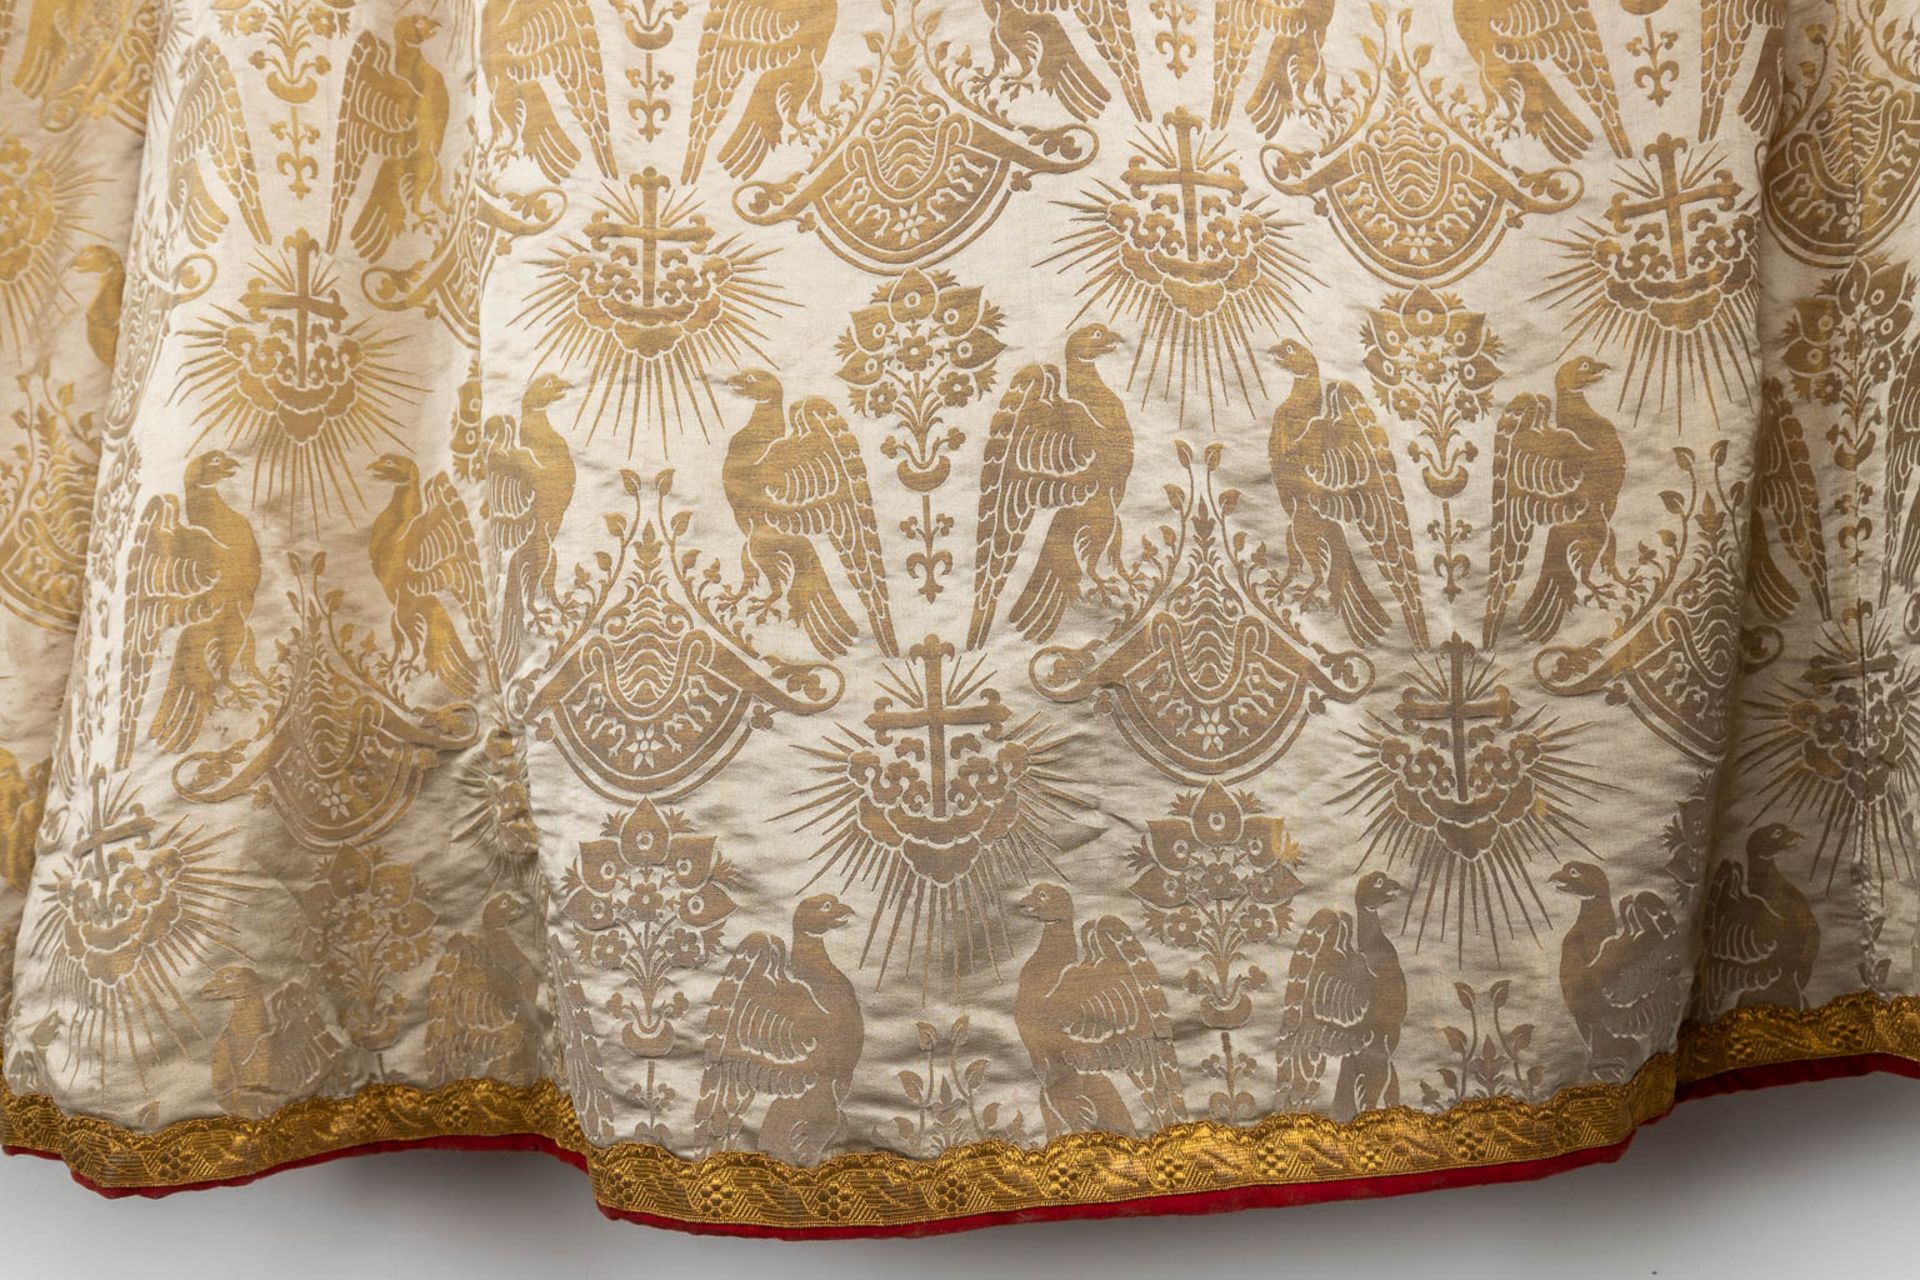 An antique cope, thick gold thread embroideries and decorated fabric. 19th C. (H:154 cm) - Image 5 of 8